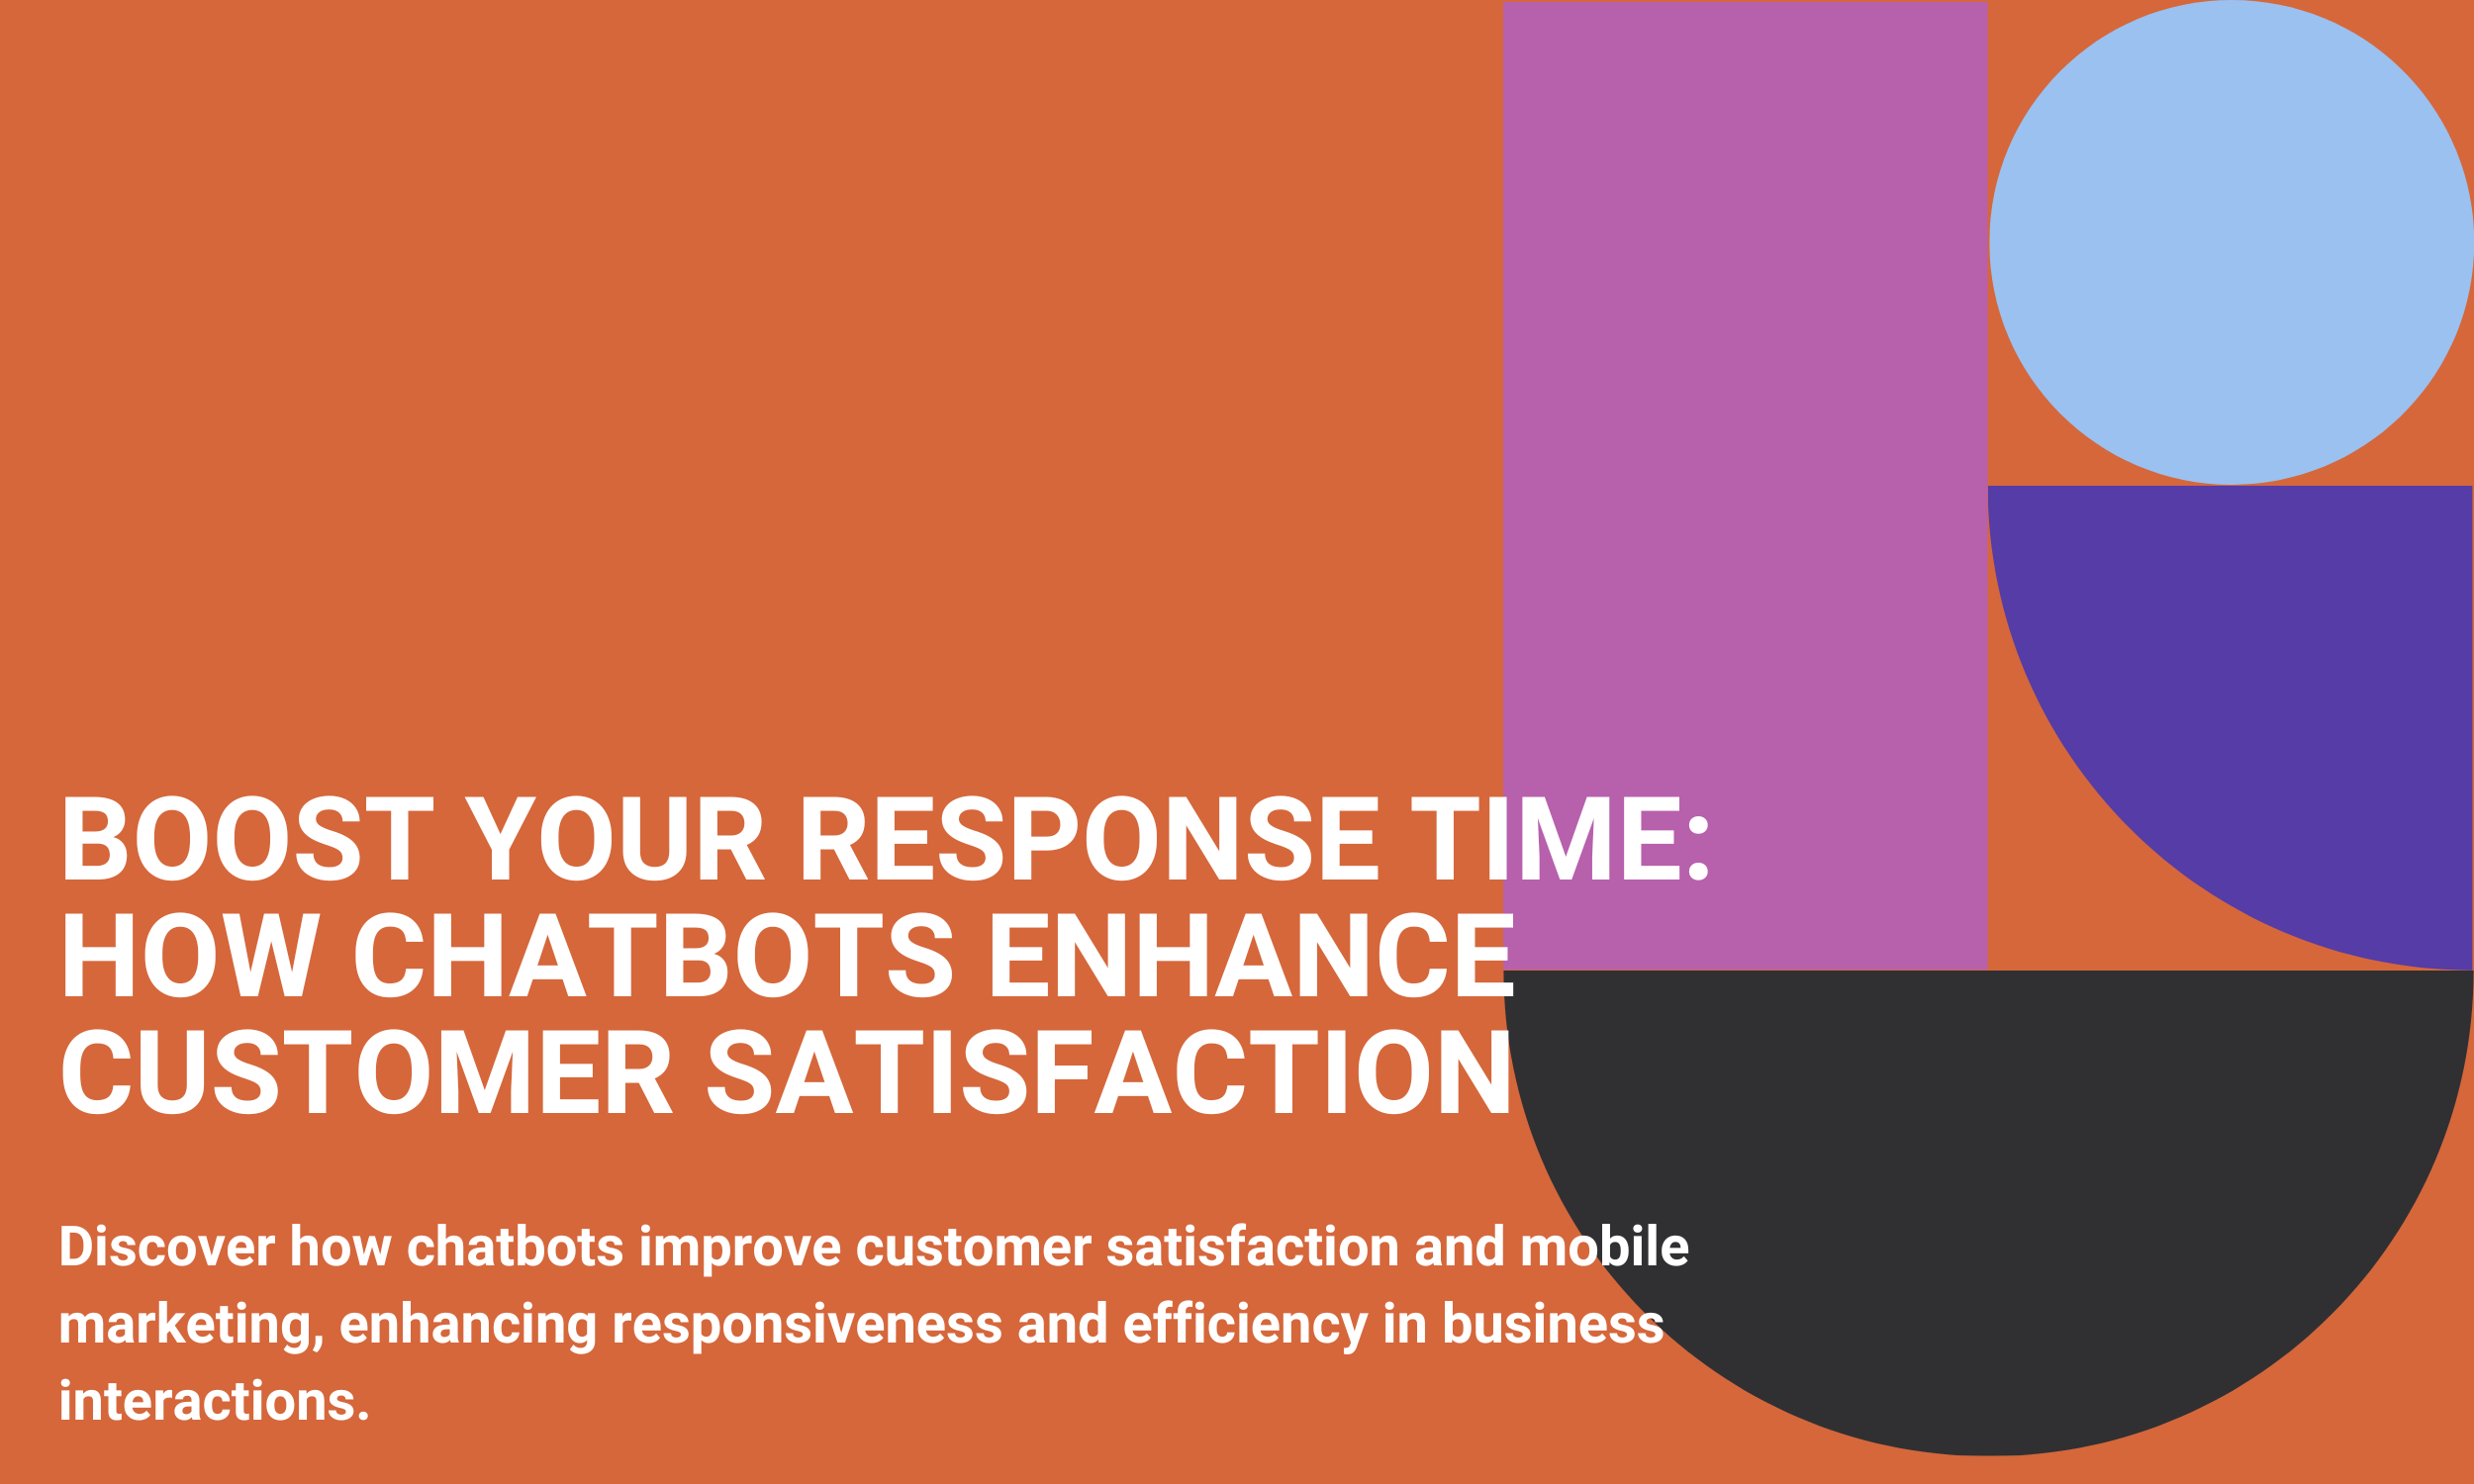 Boost Your Response Time: How Chatbots Enhance Customer Satisfaction